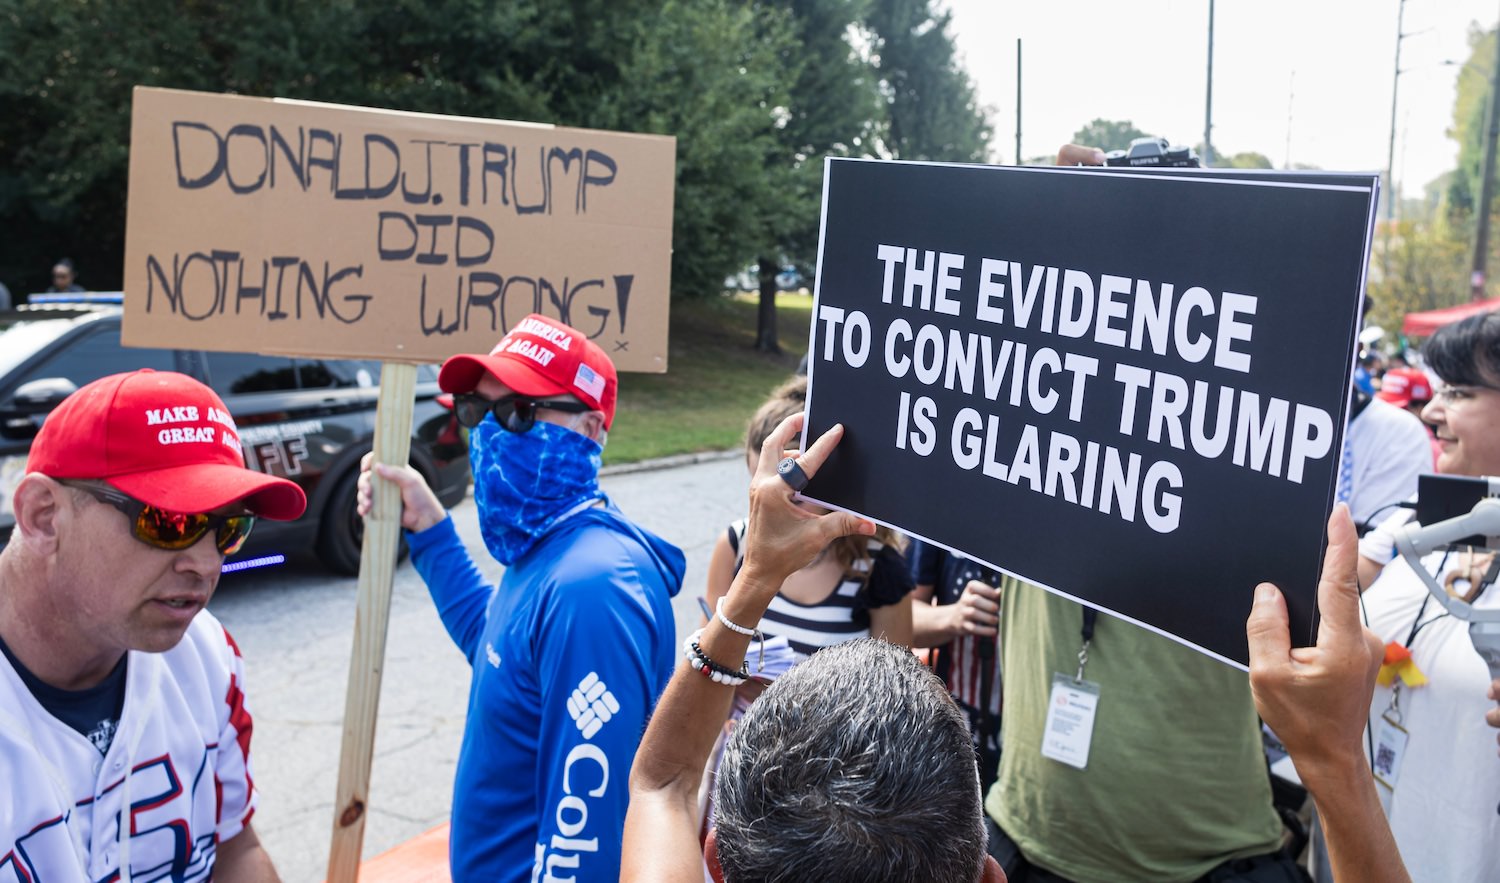 Atlanta, GA USA - August 24, 2023: A man holds sign that says "Donald J. Trump did nothing wrong" alongside woman holding anti-Trump sign on August 24, 2023 in Atlanta, GA.